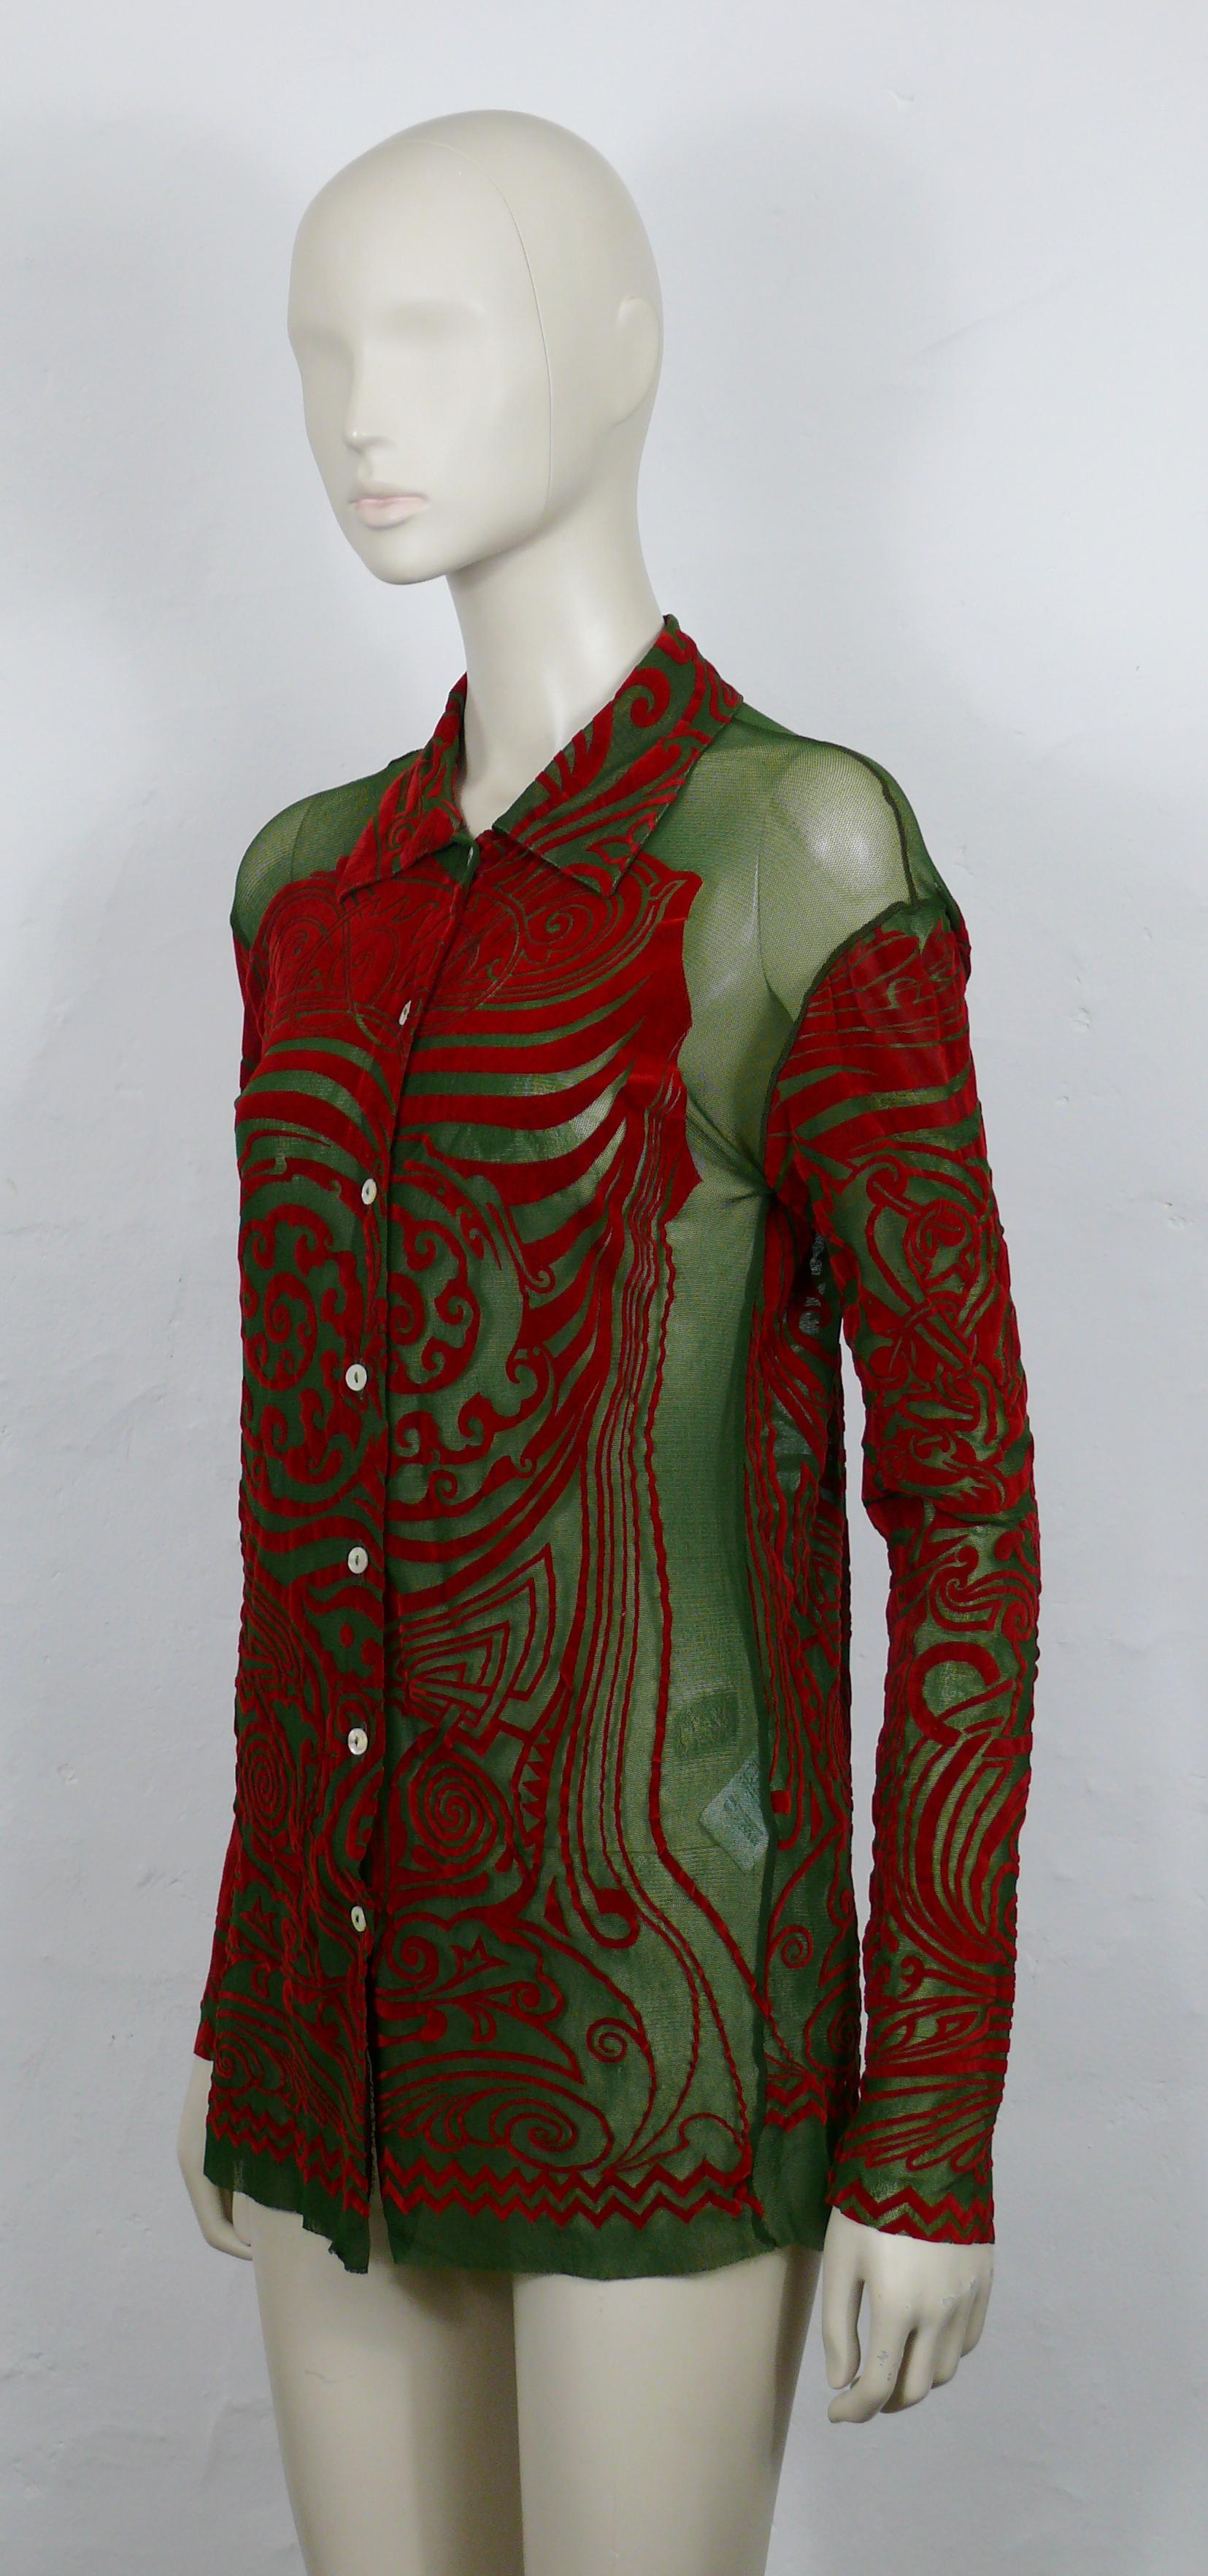 Women's or Men's JEAN PAUL GAULTIER Vintage 1996 Iconic Green/Red Tribal Tattoo Mesh Shirt Size L For Sale